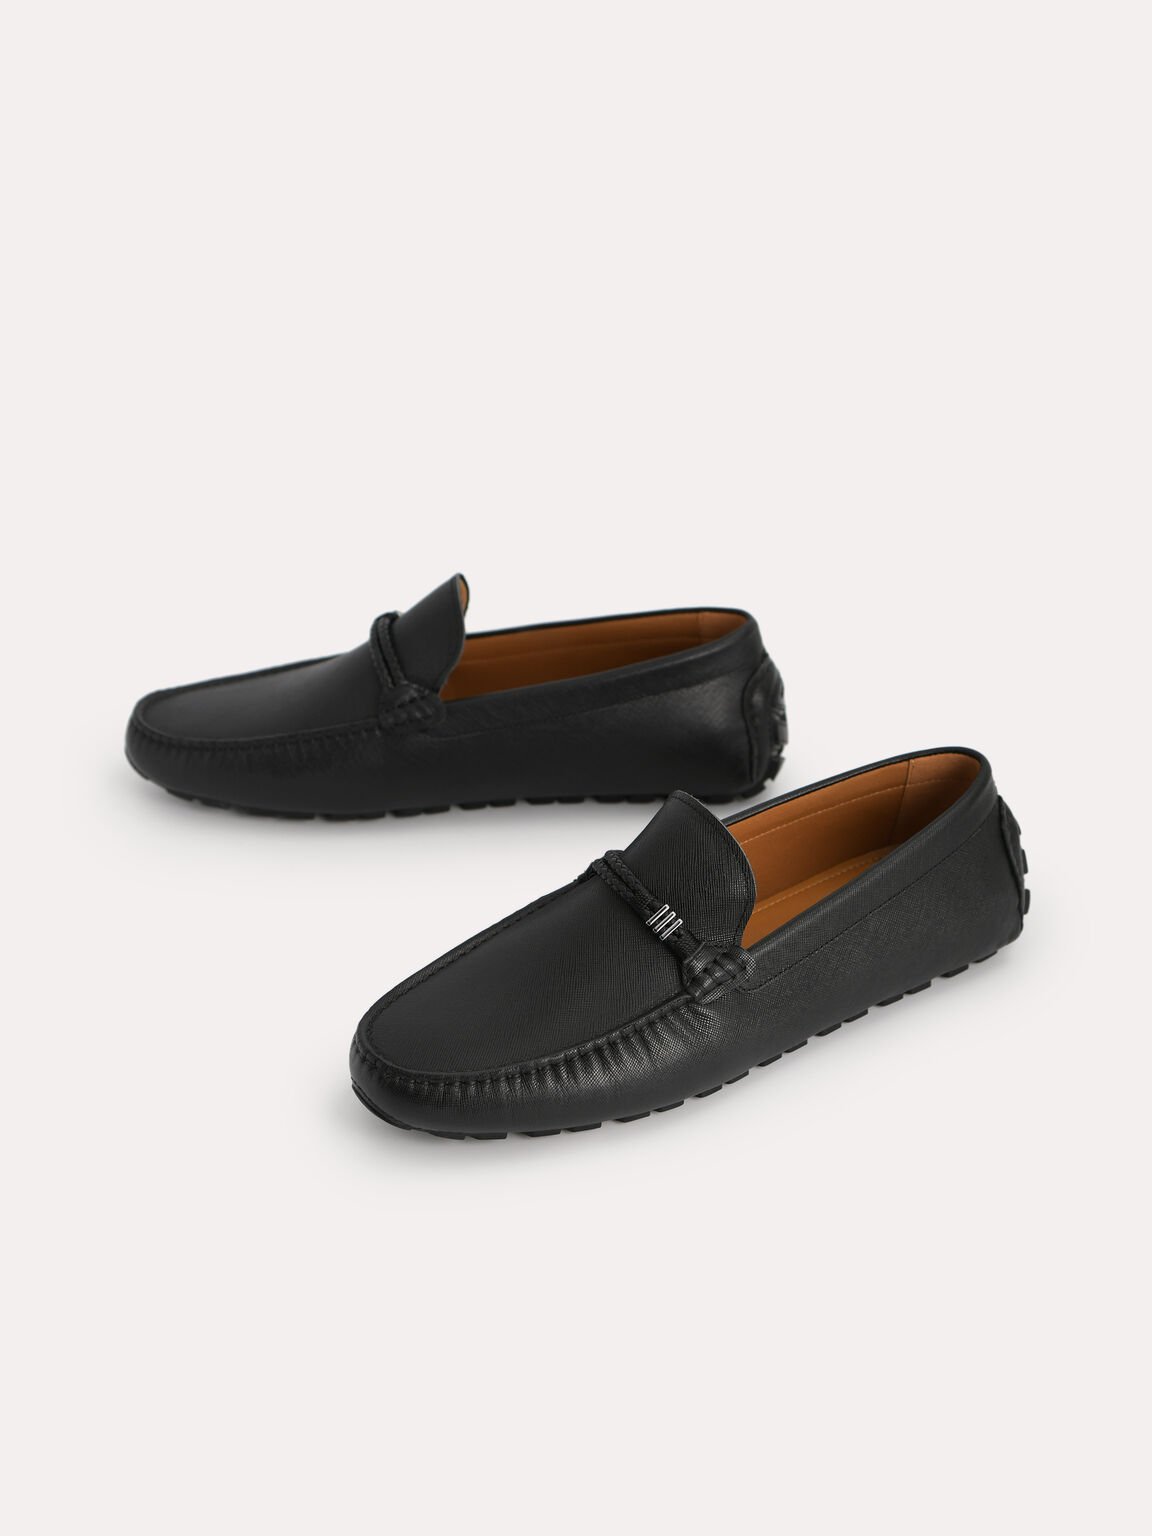 Leather Moccasins with Rope Detailing, Black, hi-res